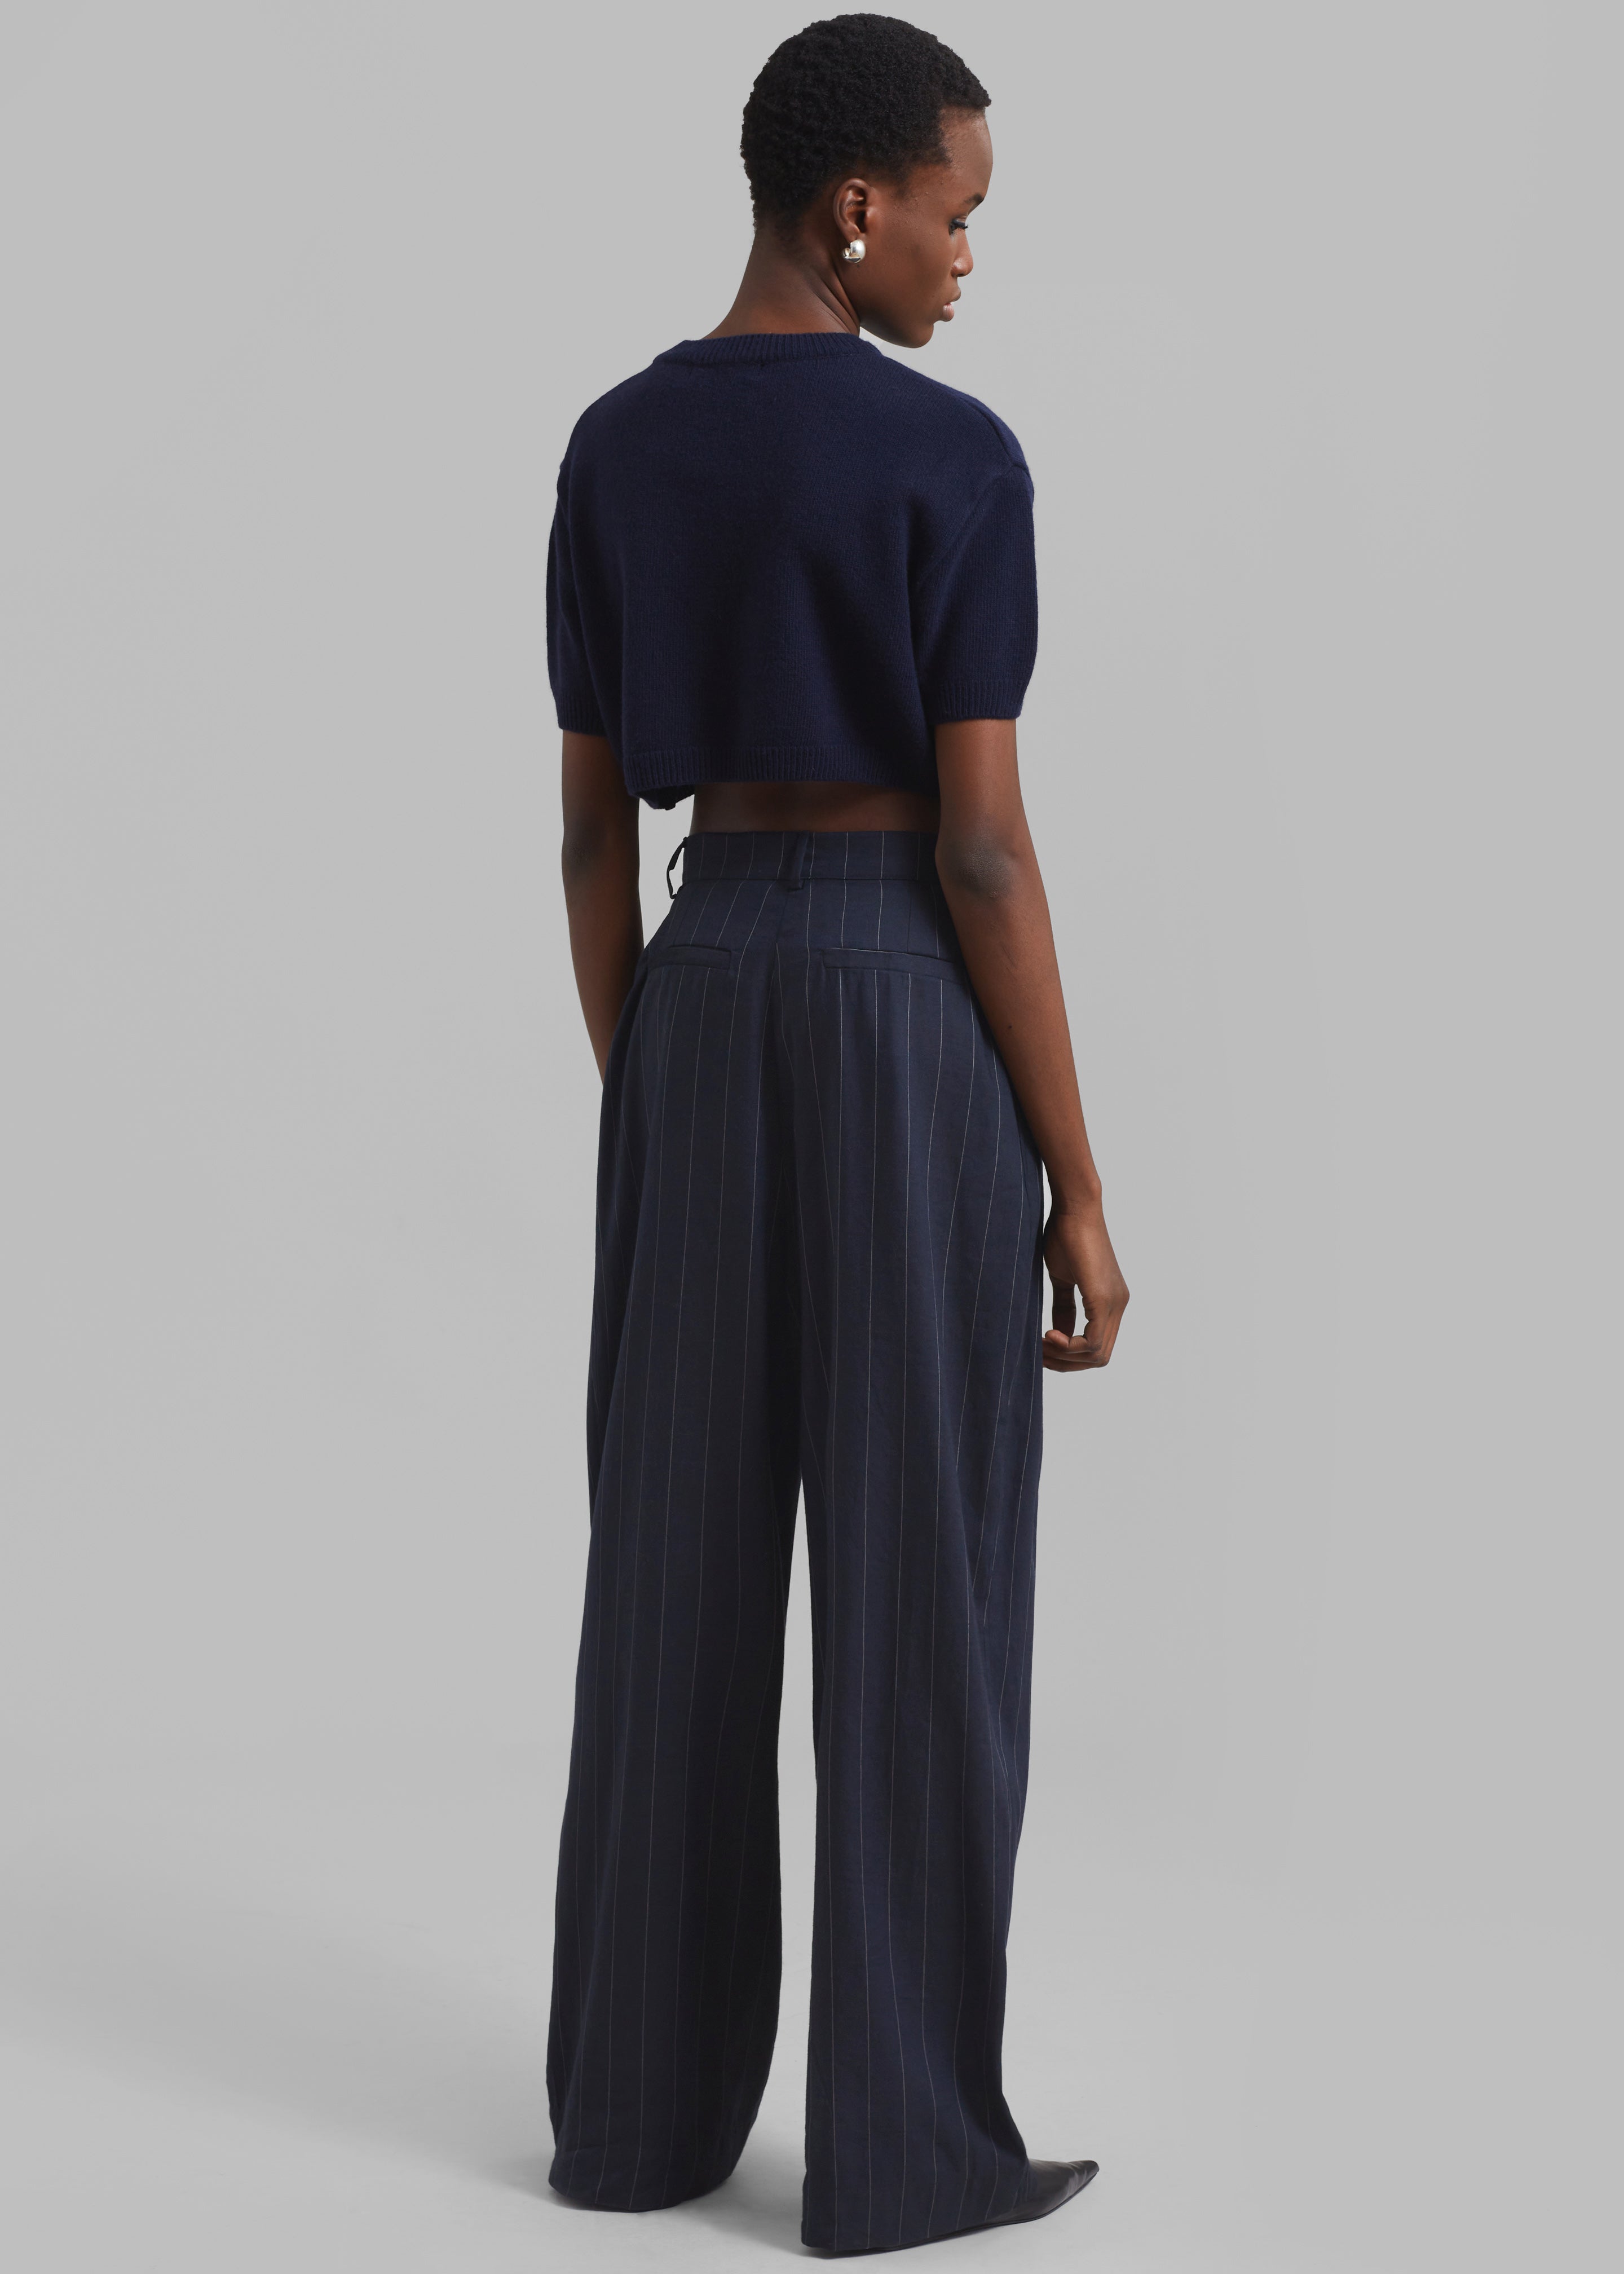 Piper Pleated Trousers - Navy/Beige Pinstripe - 7